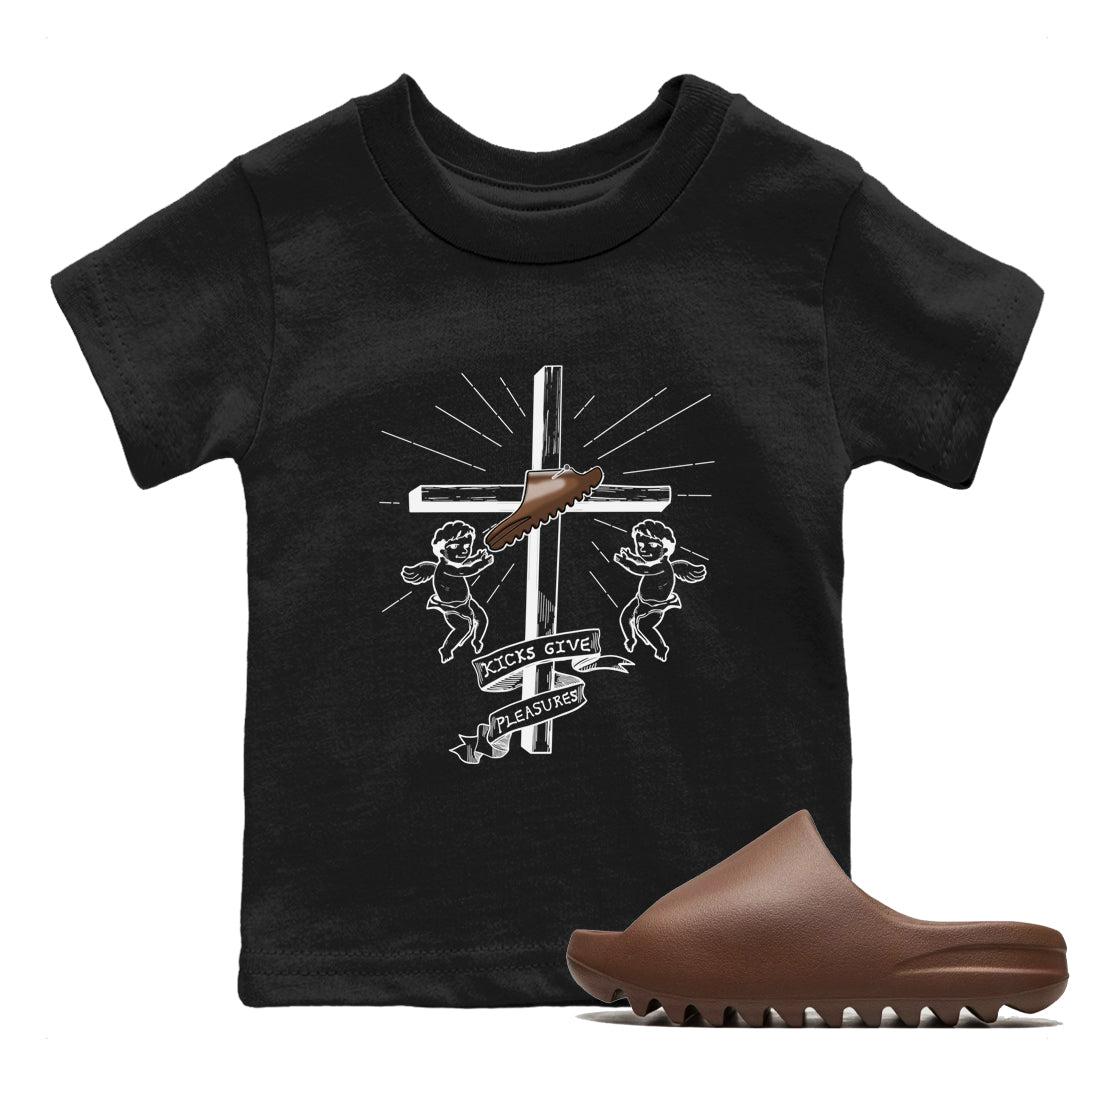 Yeezy Slide Flax shirts to match jordans Kicks Give You Pleasures sneaker match tees Yeezy Slide Flax SNRT Sneaker Tees streetwear brand Baby and Youth Black 1 cotton tee